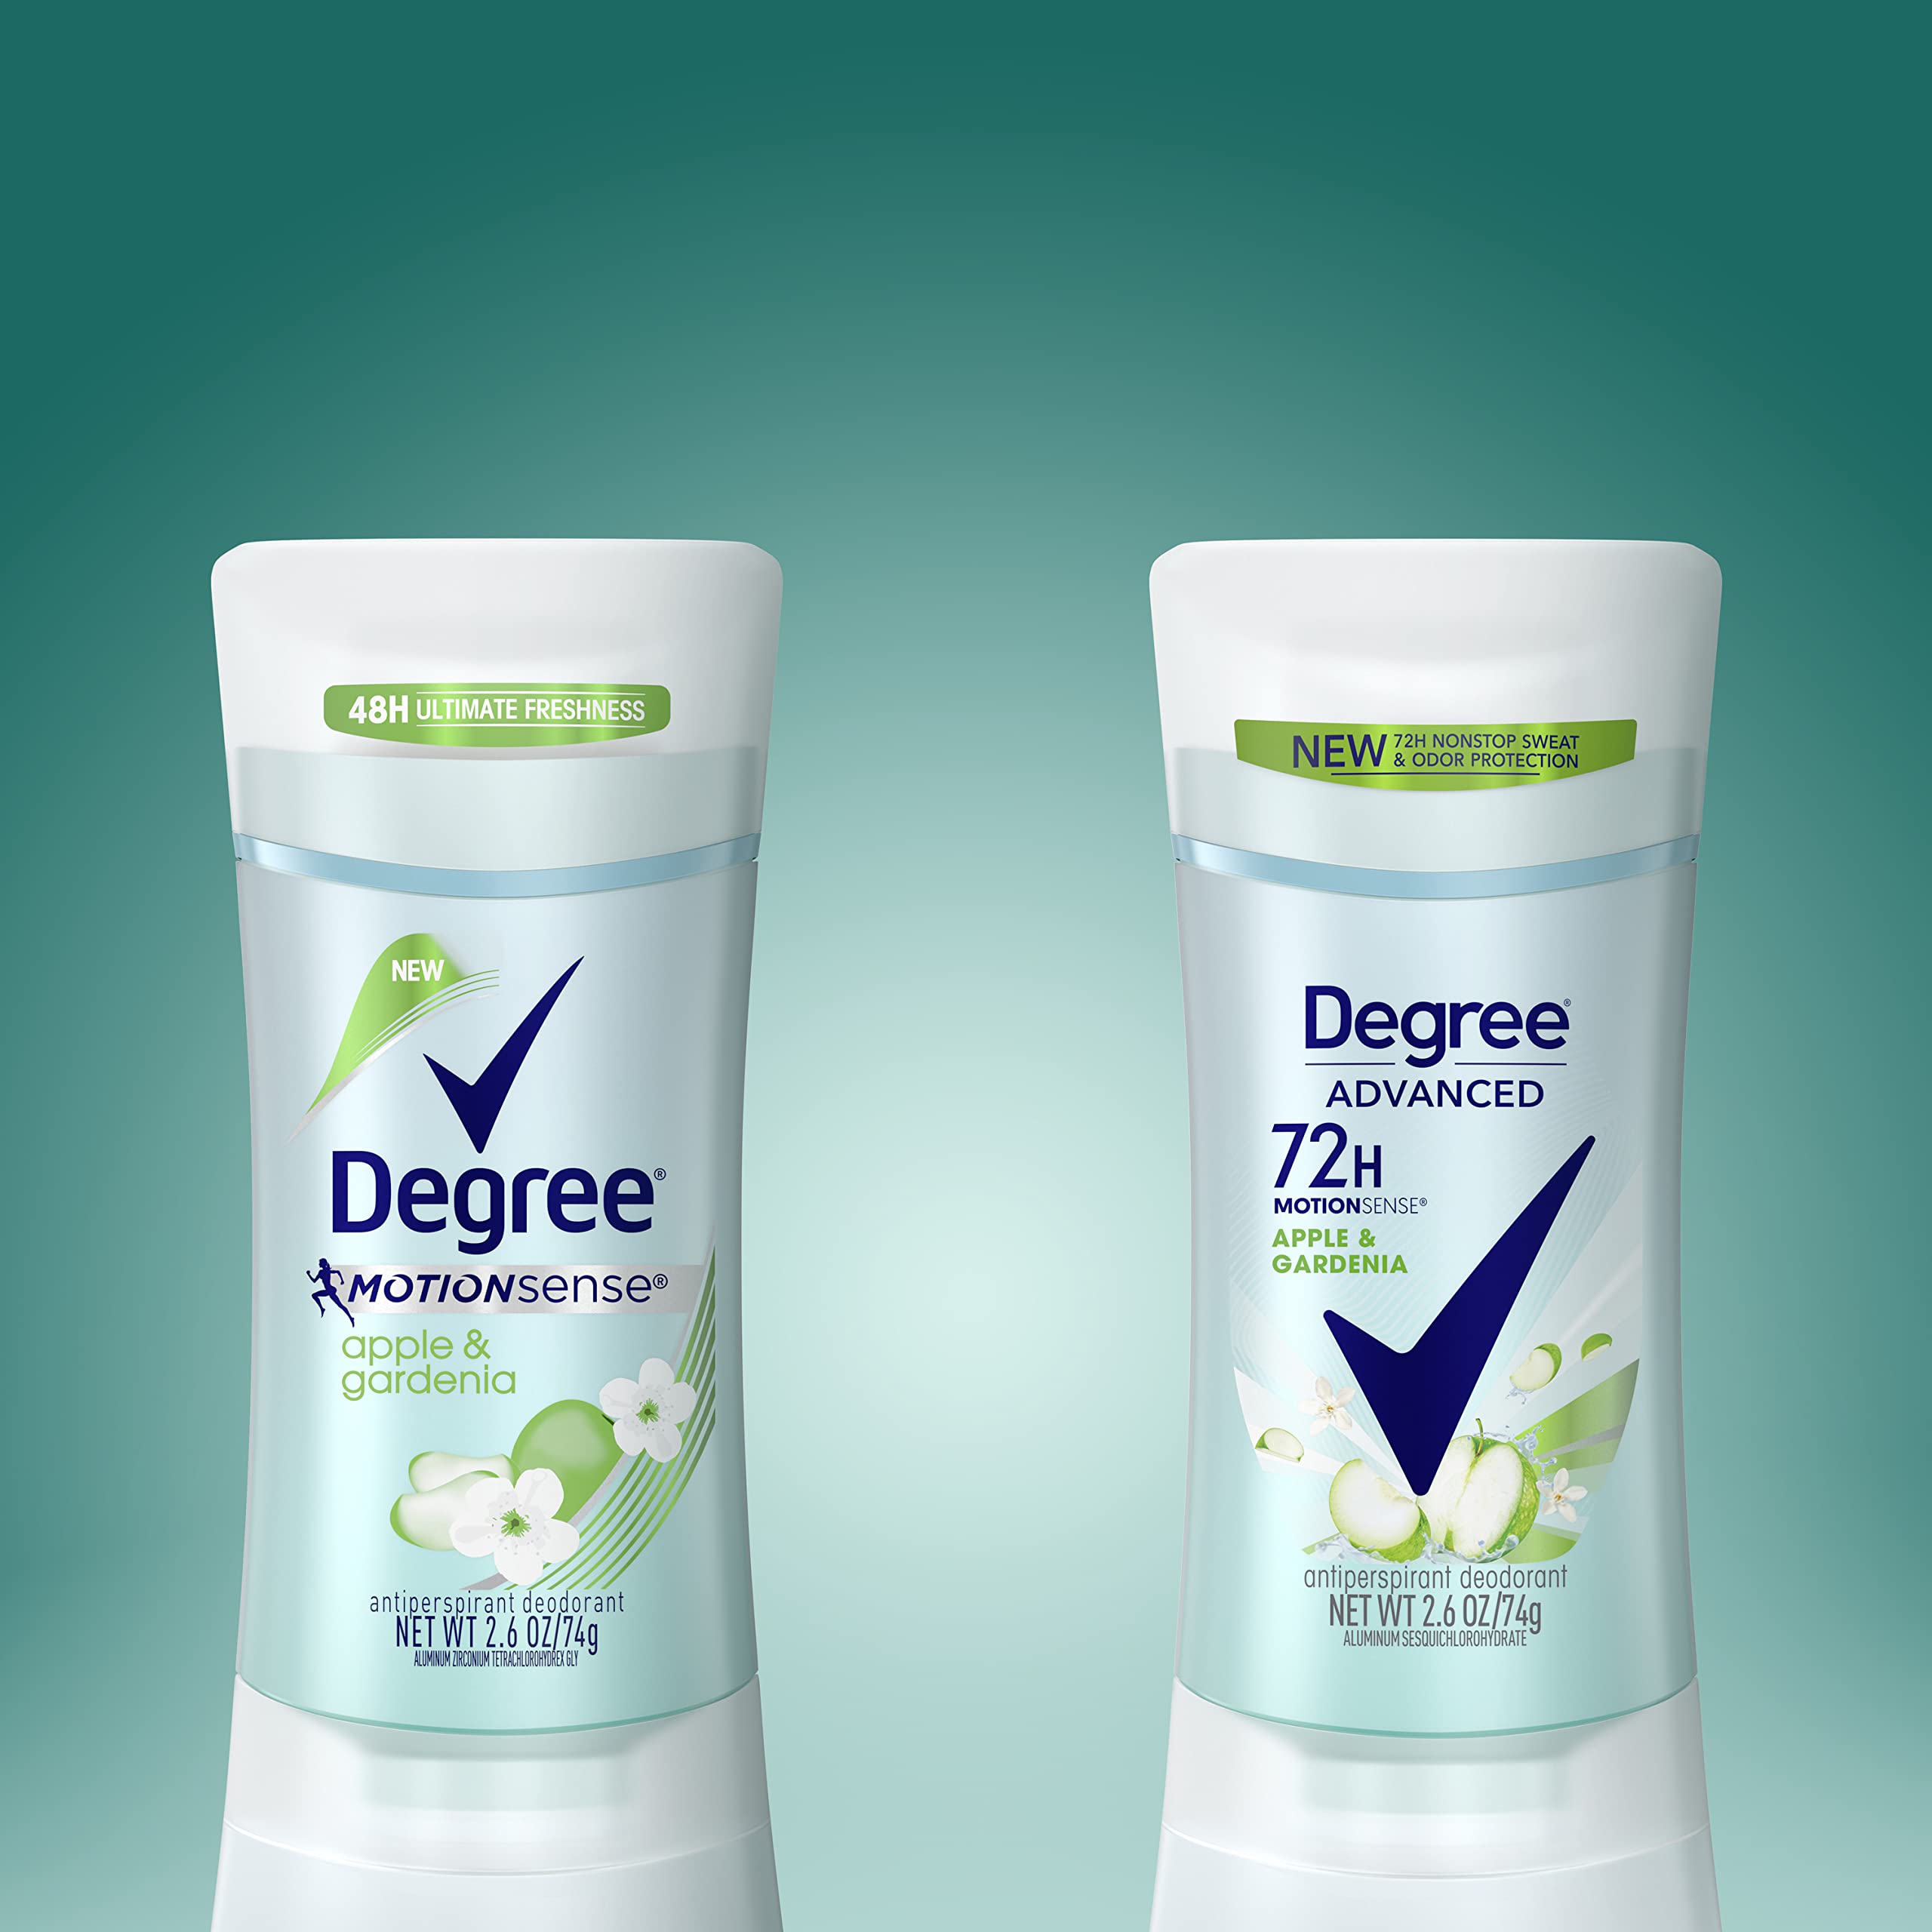 Degree Advanced Antiperspirant Deodorant 72-Hour Sweat & Odor Protection Apple & Gardenia Deodorant for Women with MotionSense Technology, 2.6 Ounce (Pack of 4)